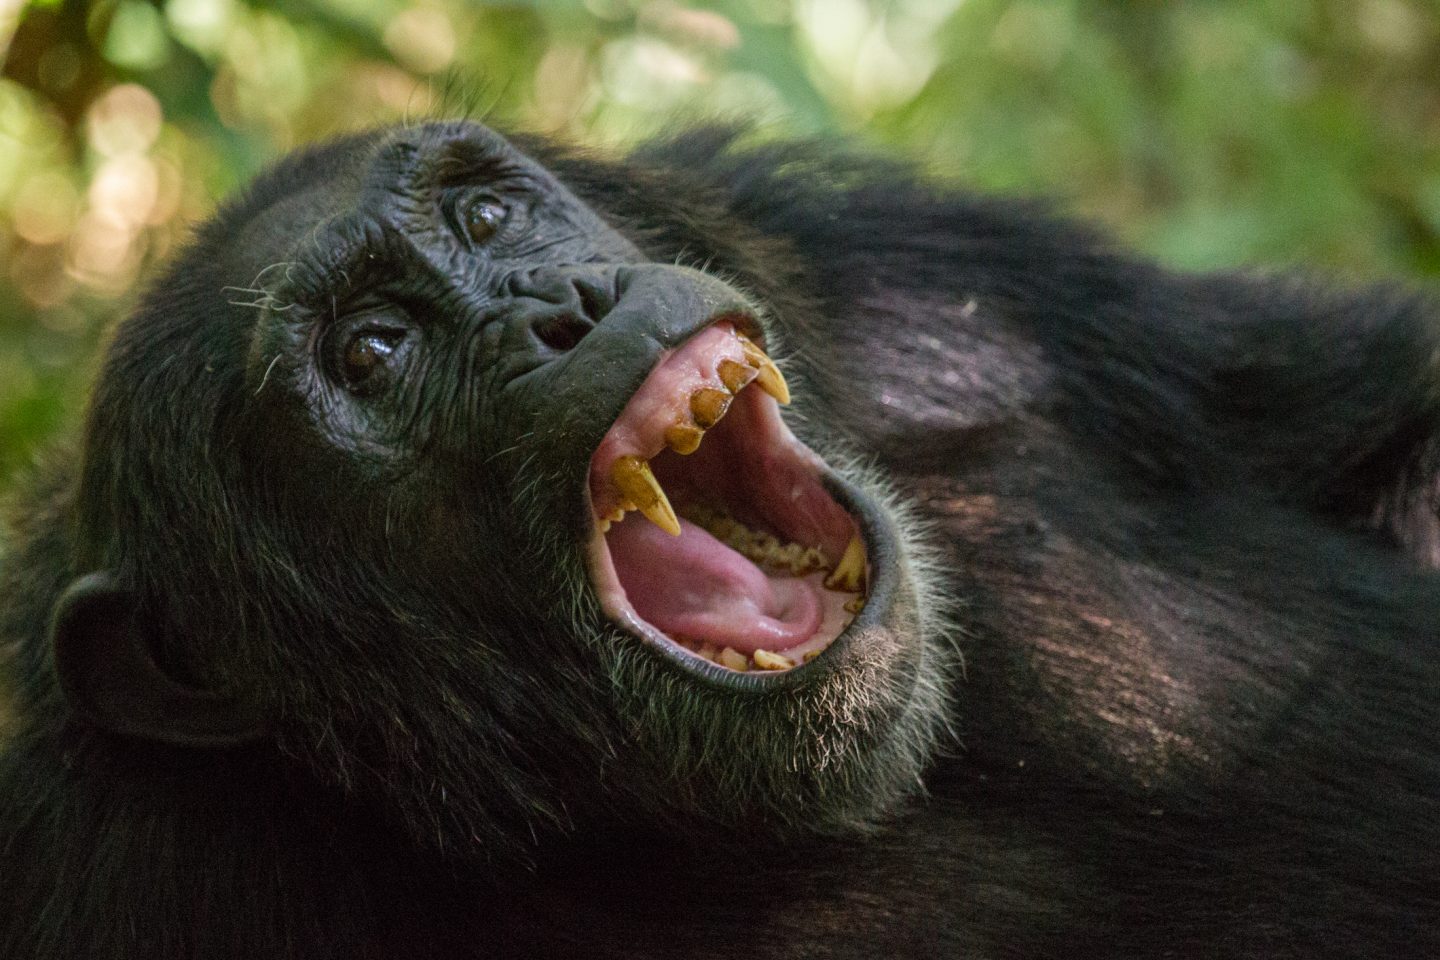 Mountains out of molarhills: understanding how teeth develop can help us understand relationships between humans and related species like chimpanzees.